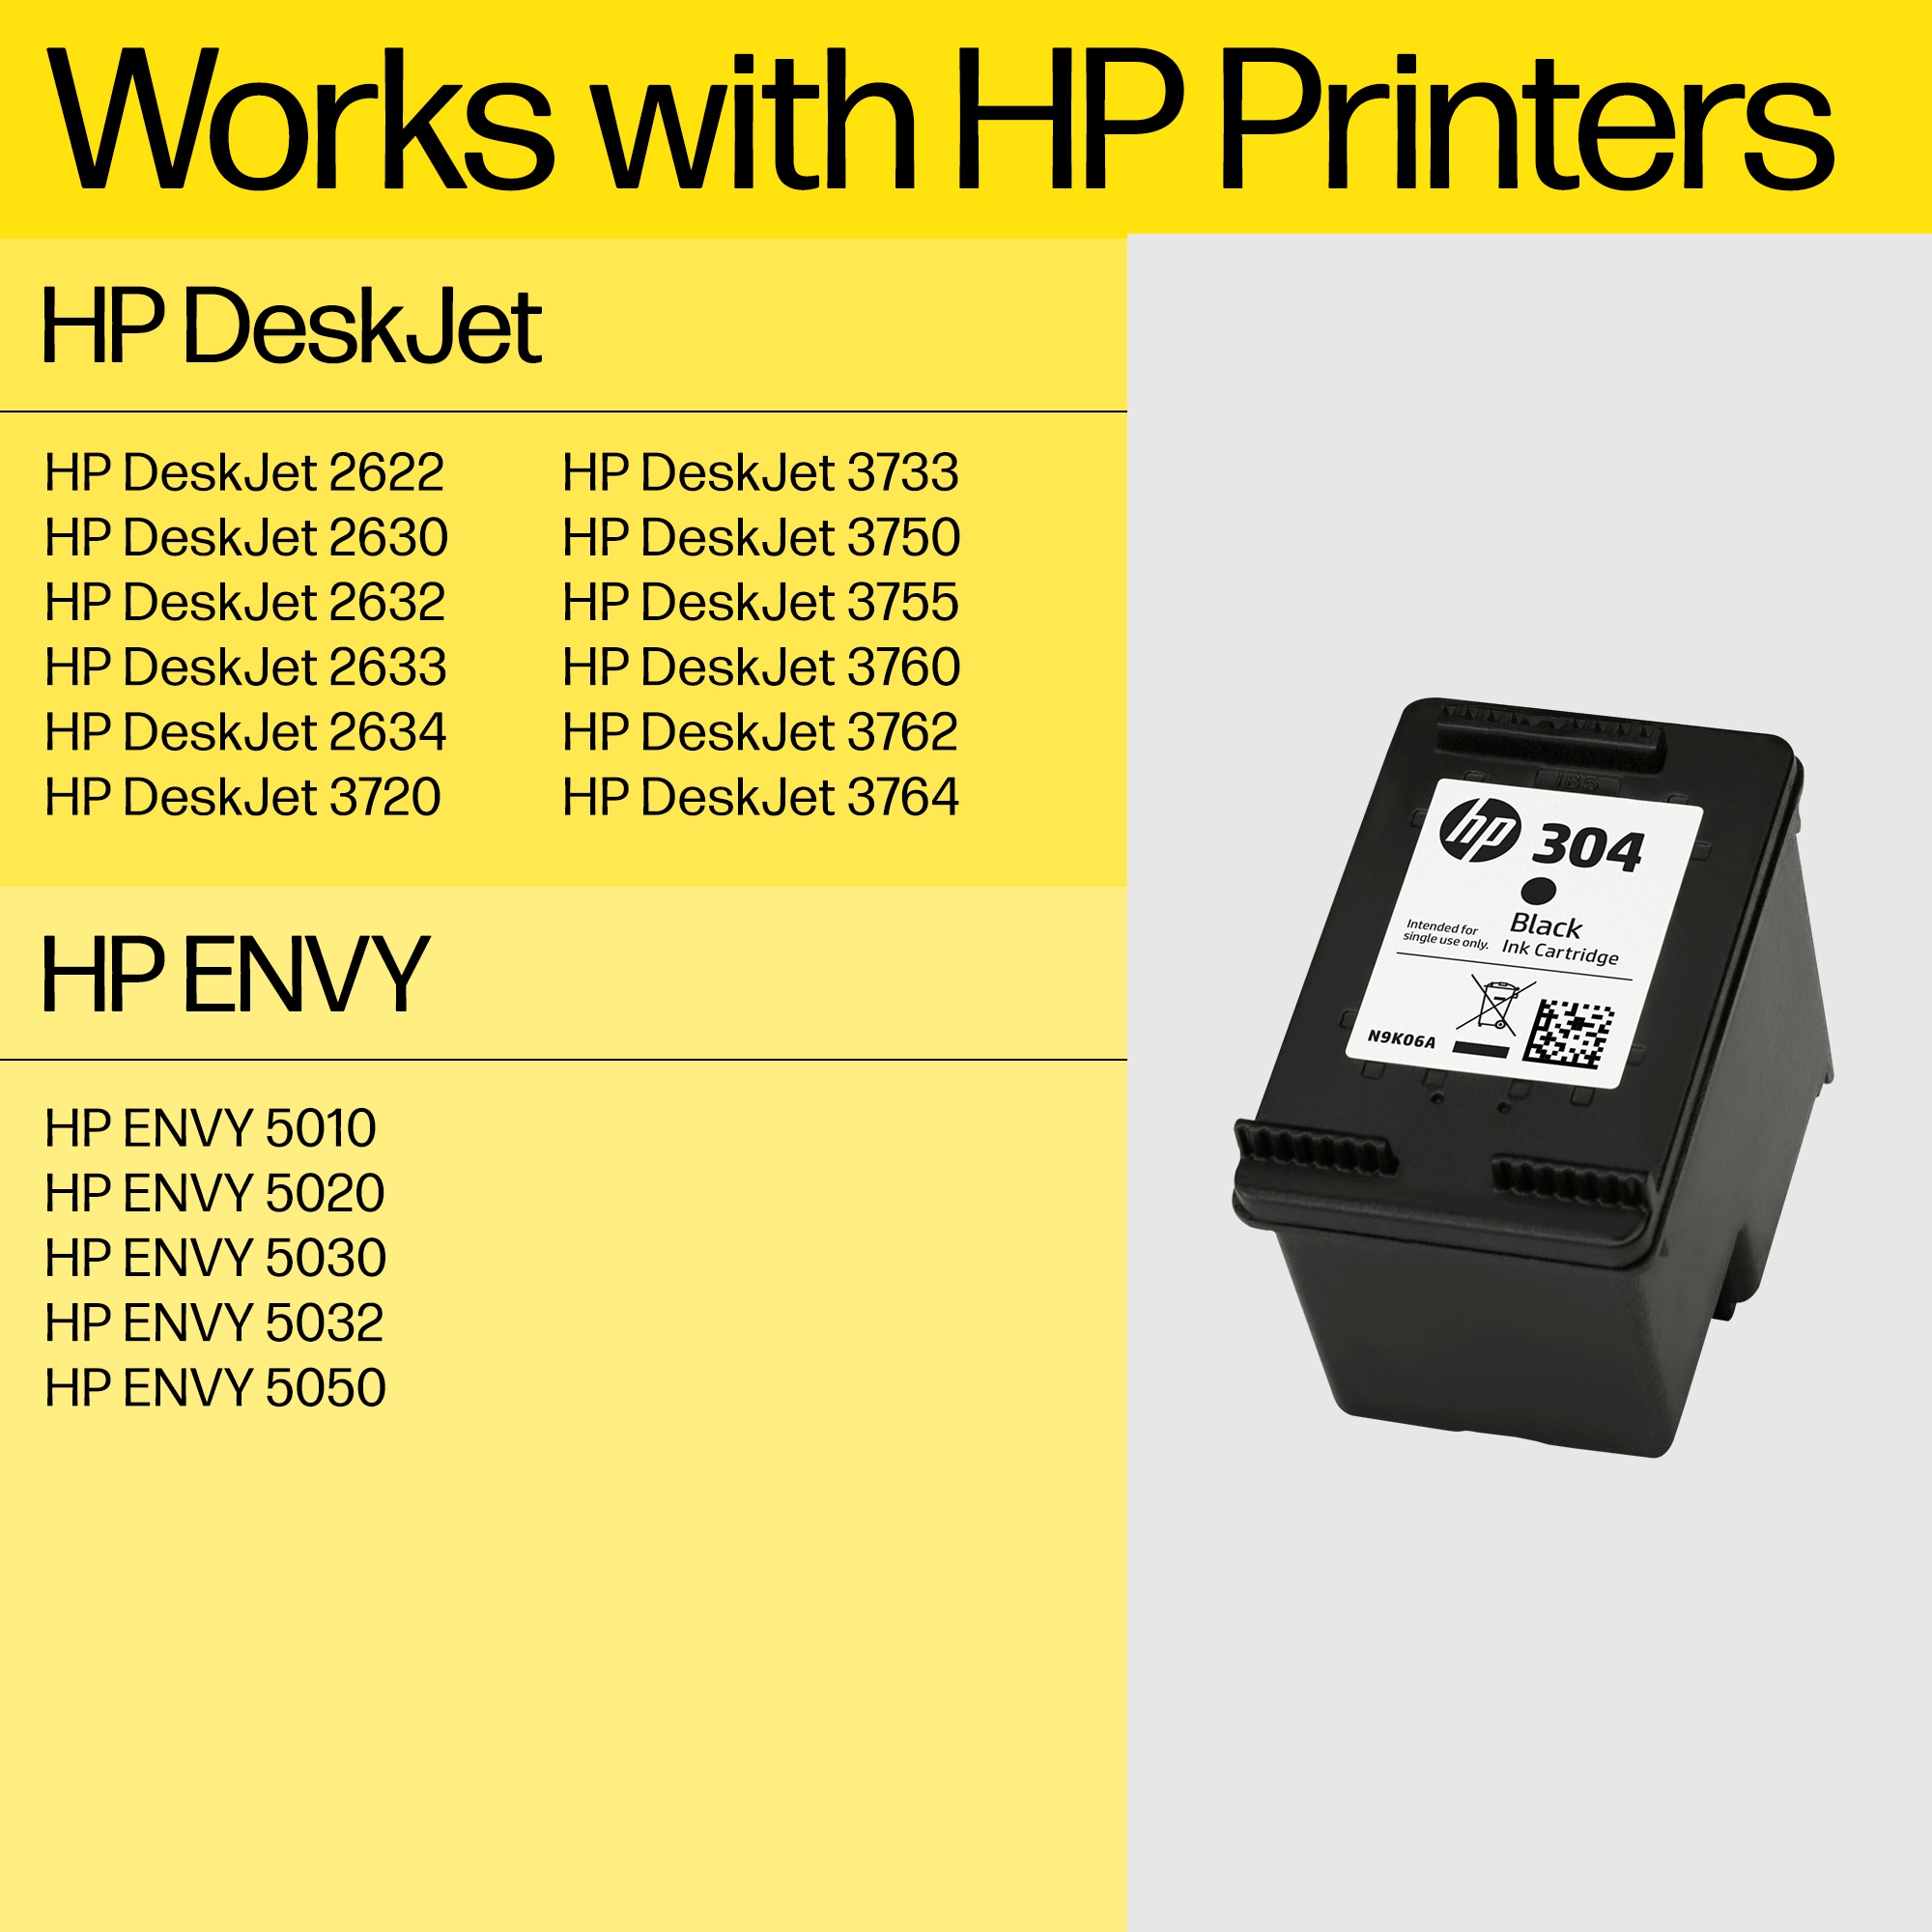 HP 3JB05AE/304 Printhead cartridge 14571 sell in + The 100 pg - to 120 Pack=2 Channel HP distributor/wholesale multi 2620/3720, for for pg pack In color DeskJet resellers black stock Stock 